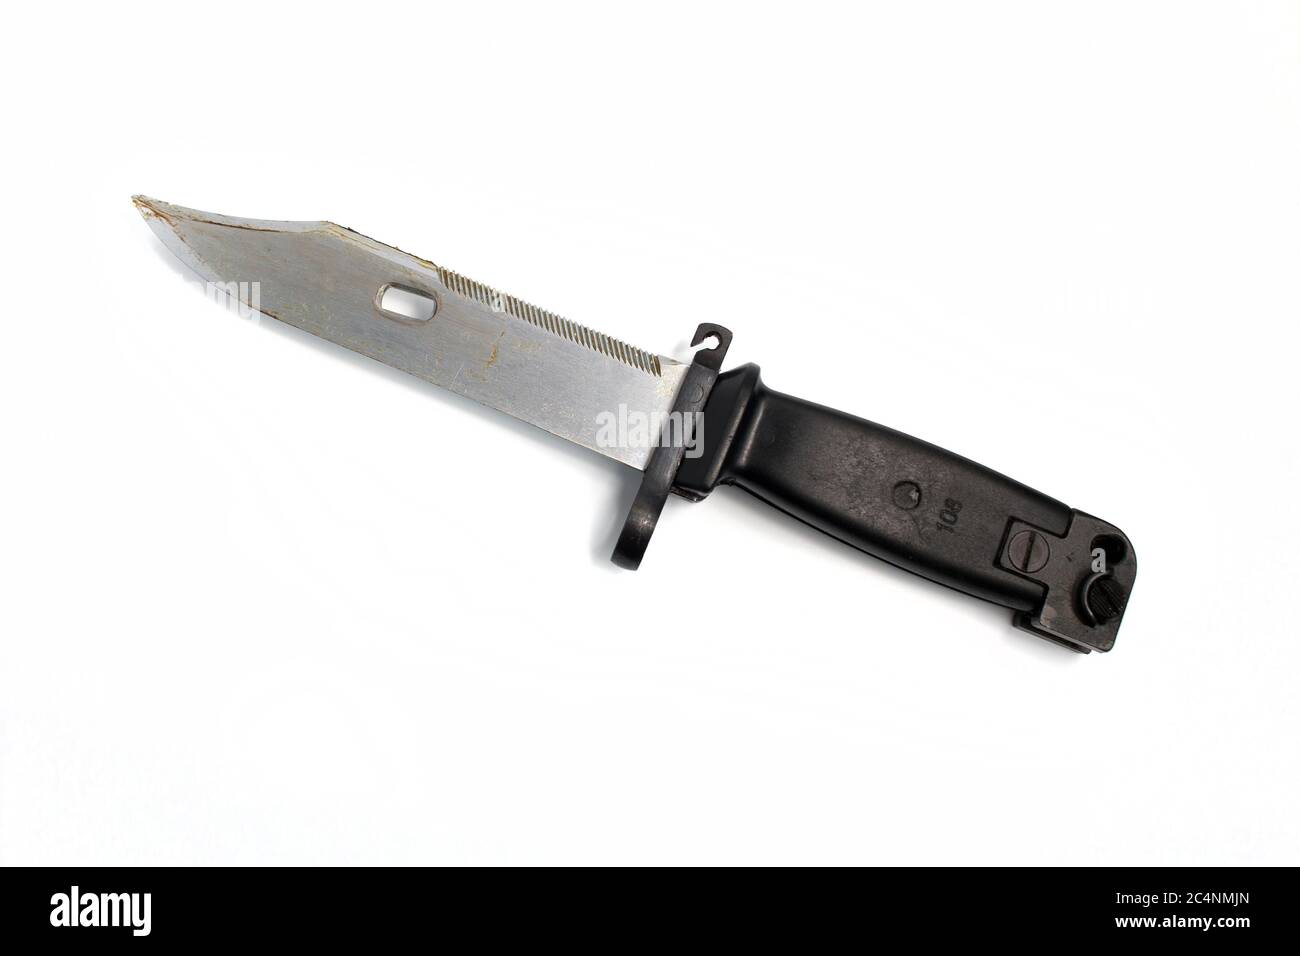 AK47 bayonet knife with a white background. Multifunctional combat army knife. Stock Photo